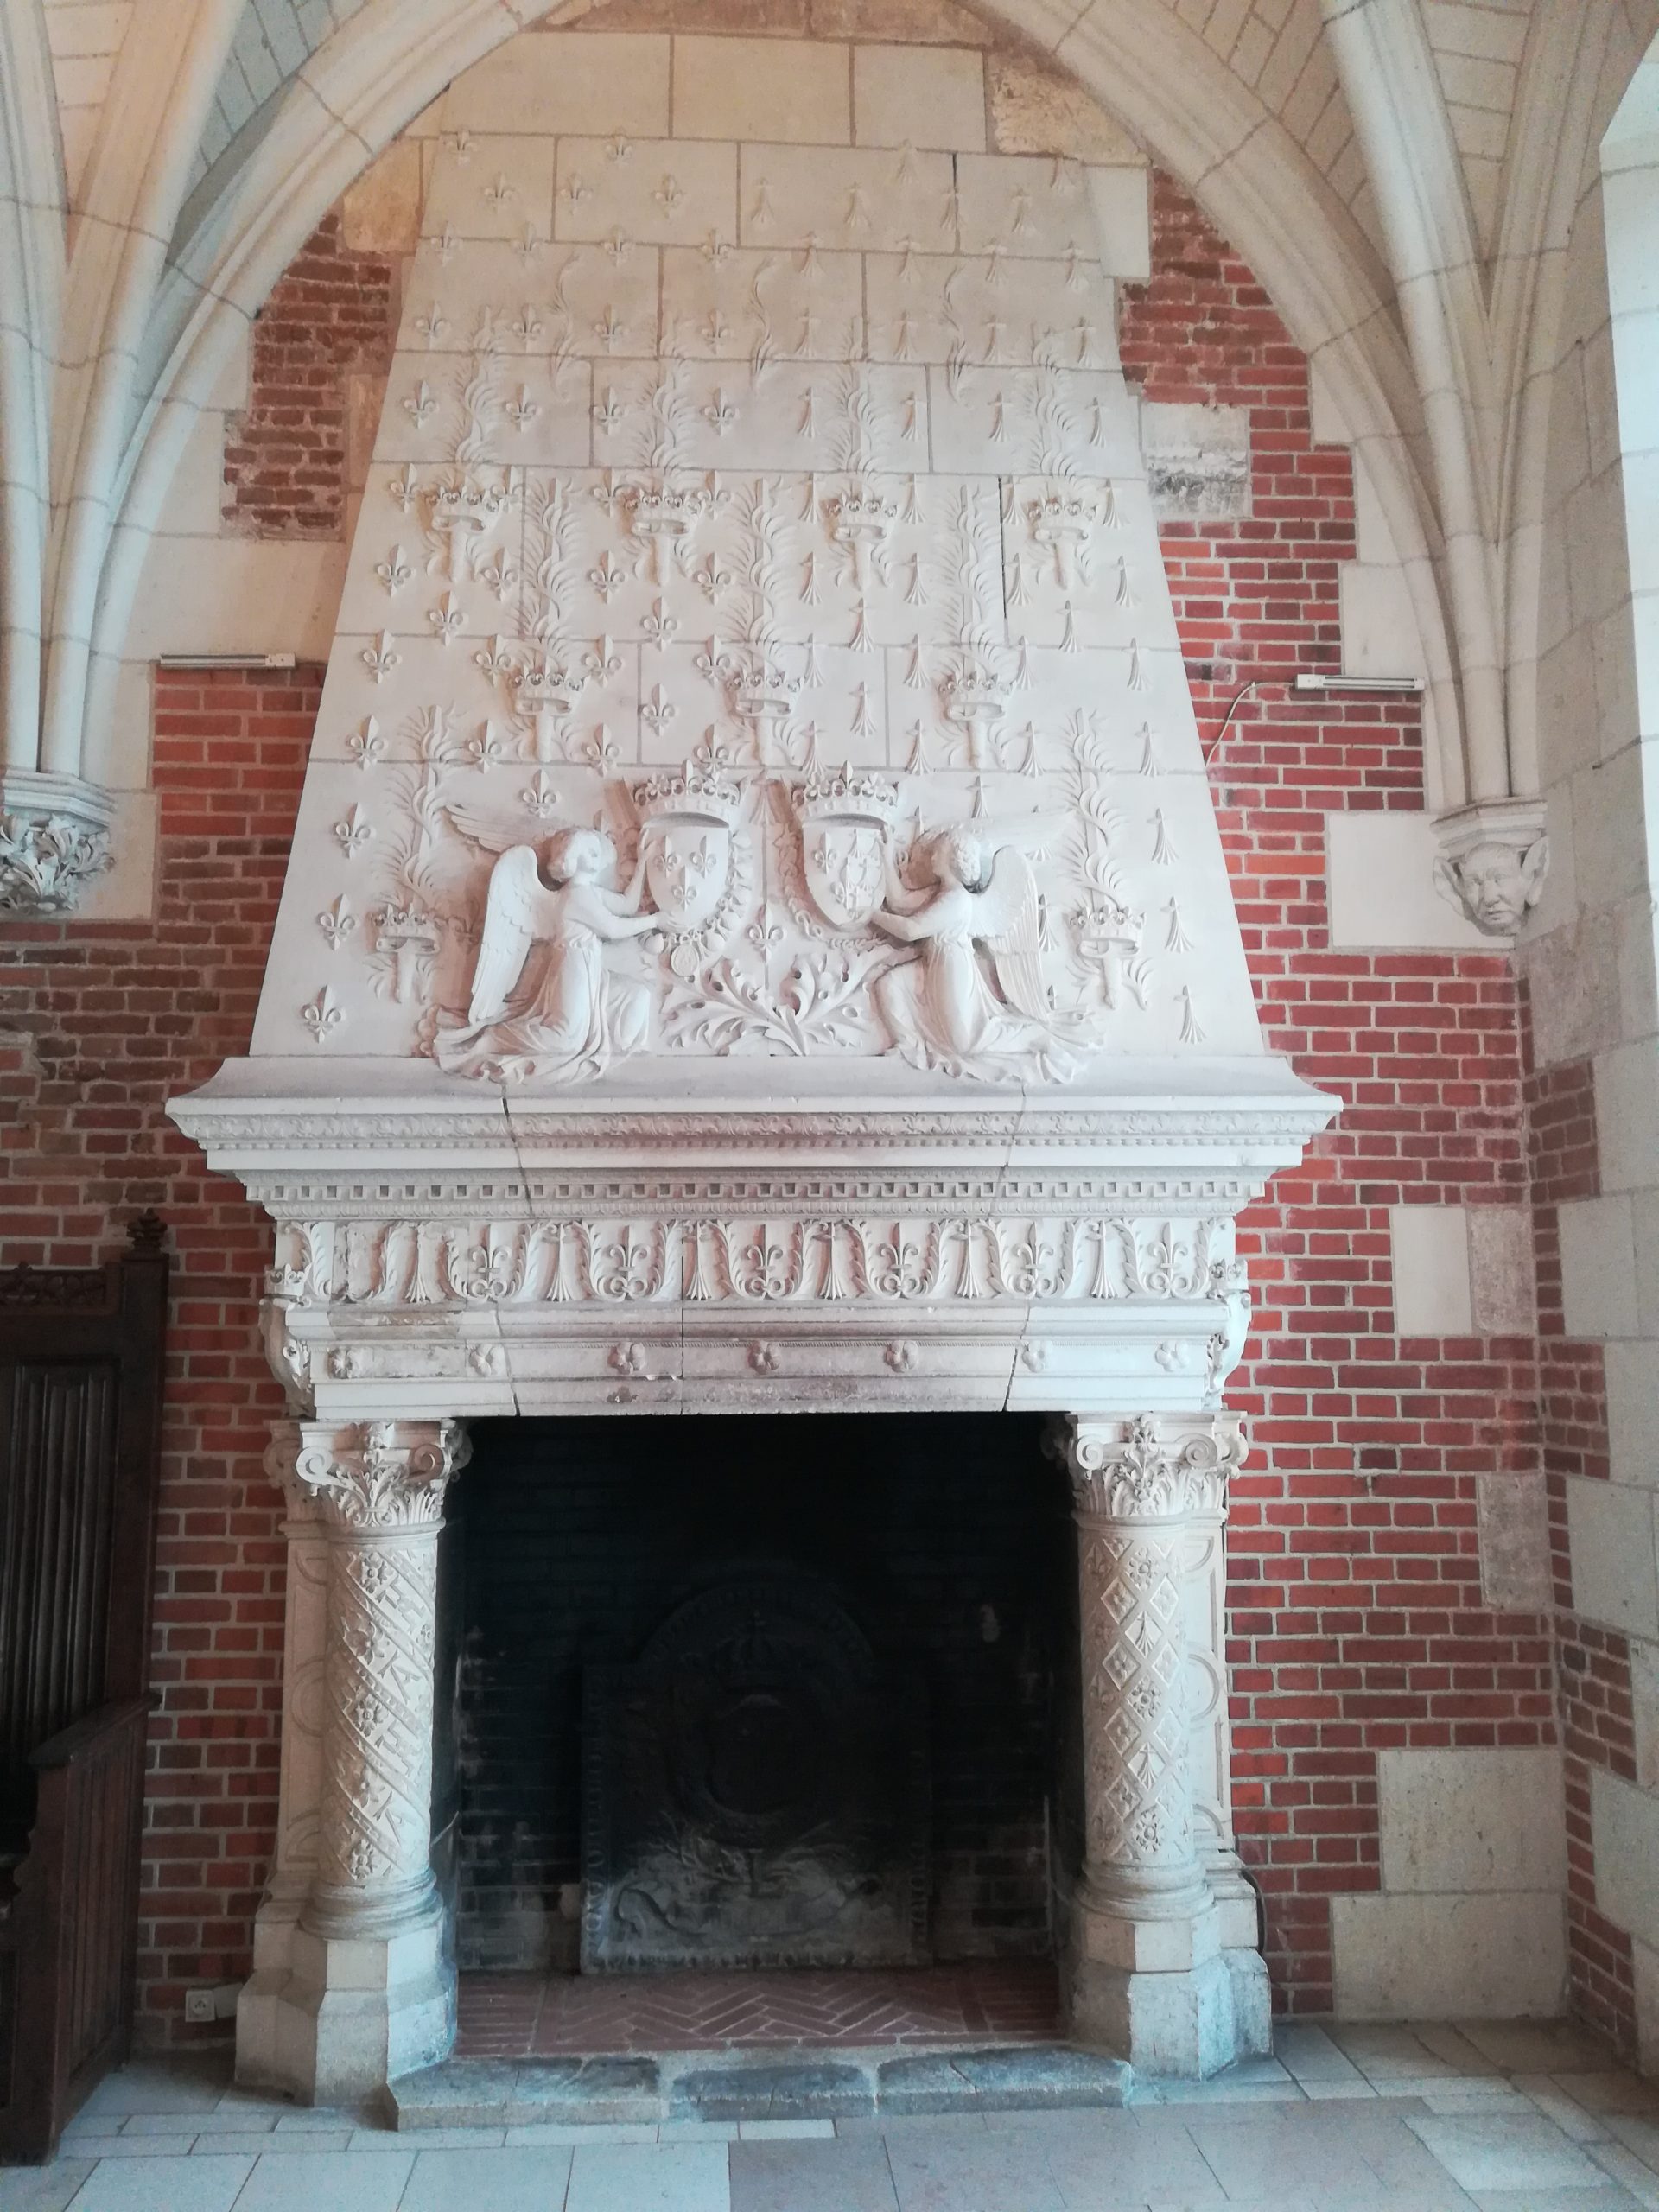 Renaissance fireplace at the Chateau of Amboise